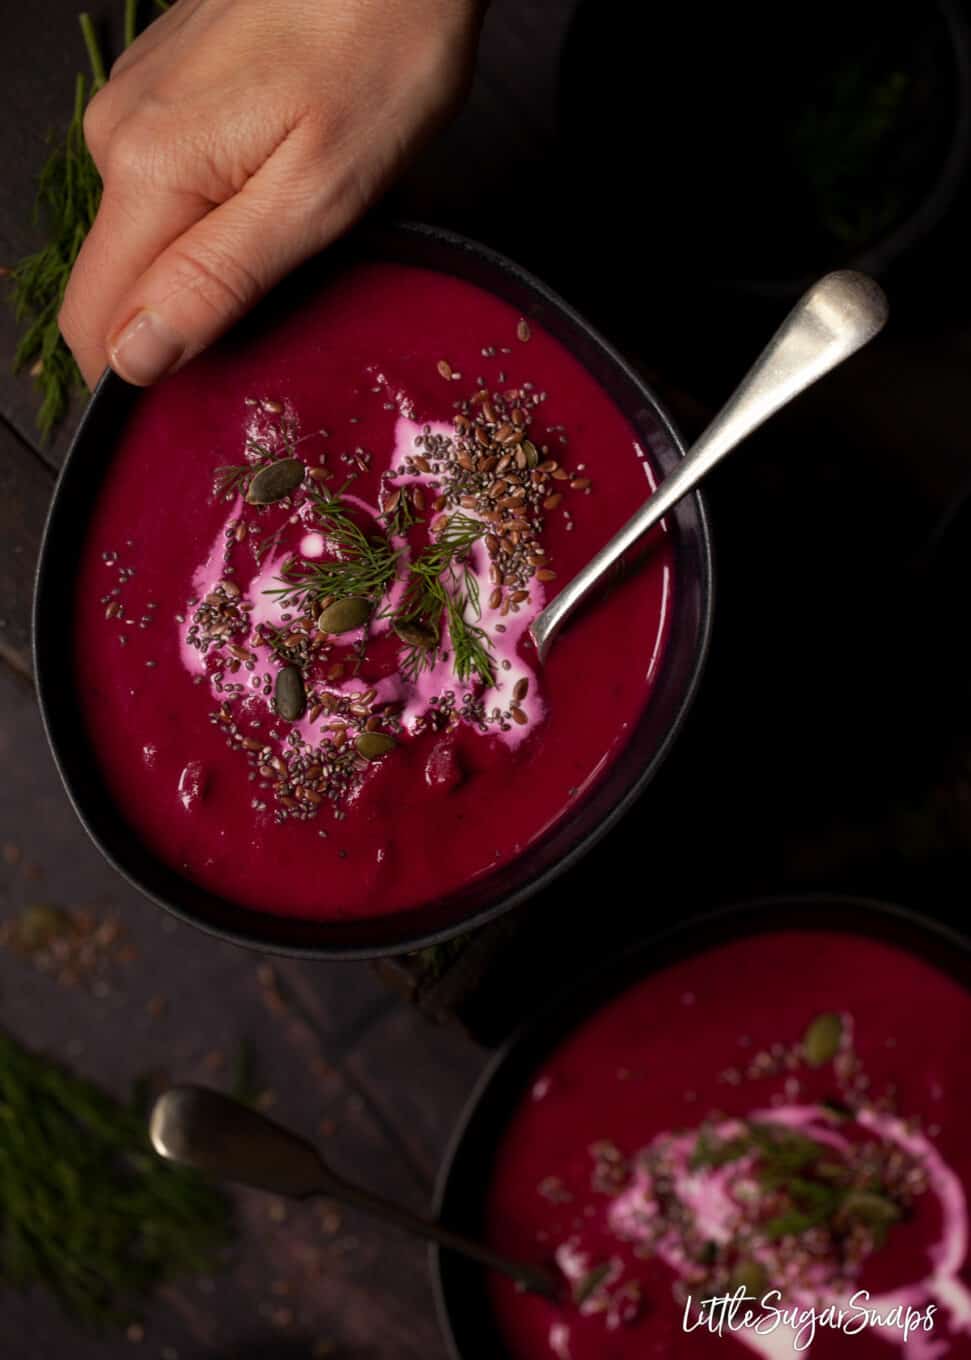 A hand reaching in to take a bowl of beetroot and horseradish soup.